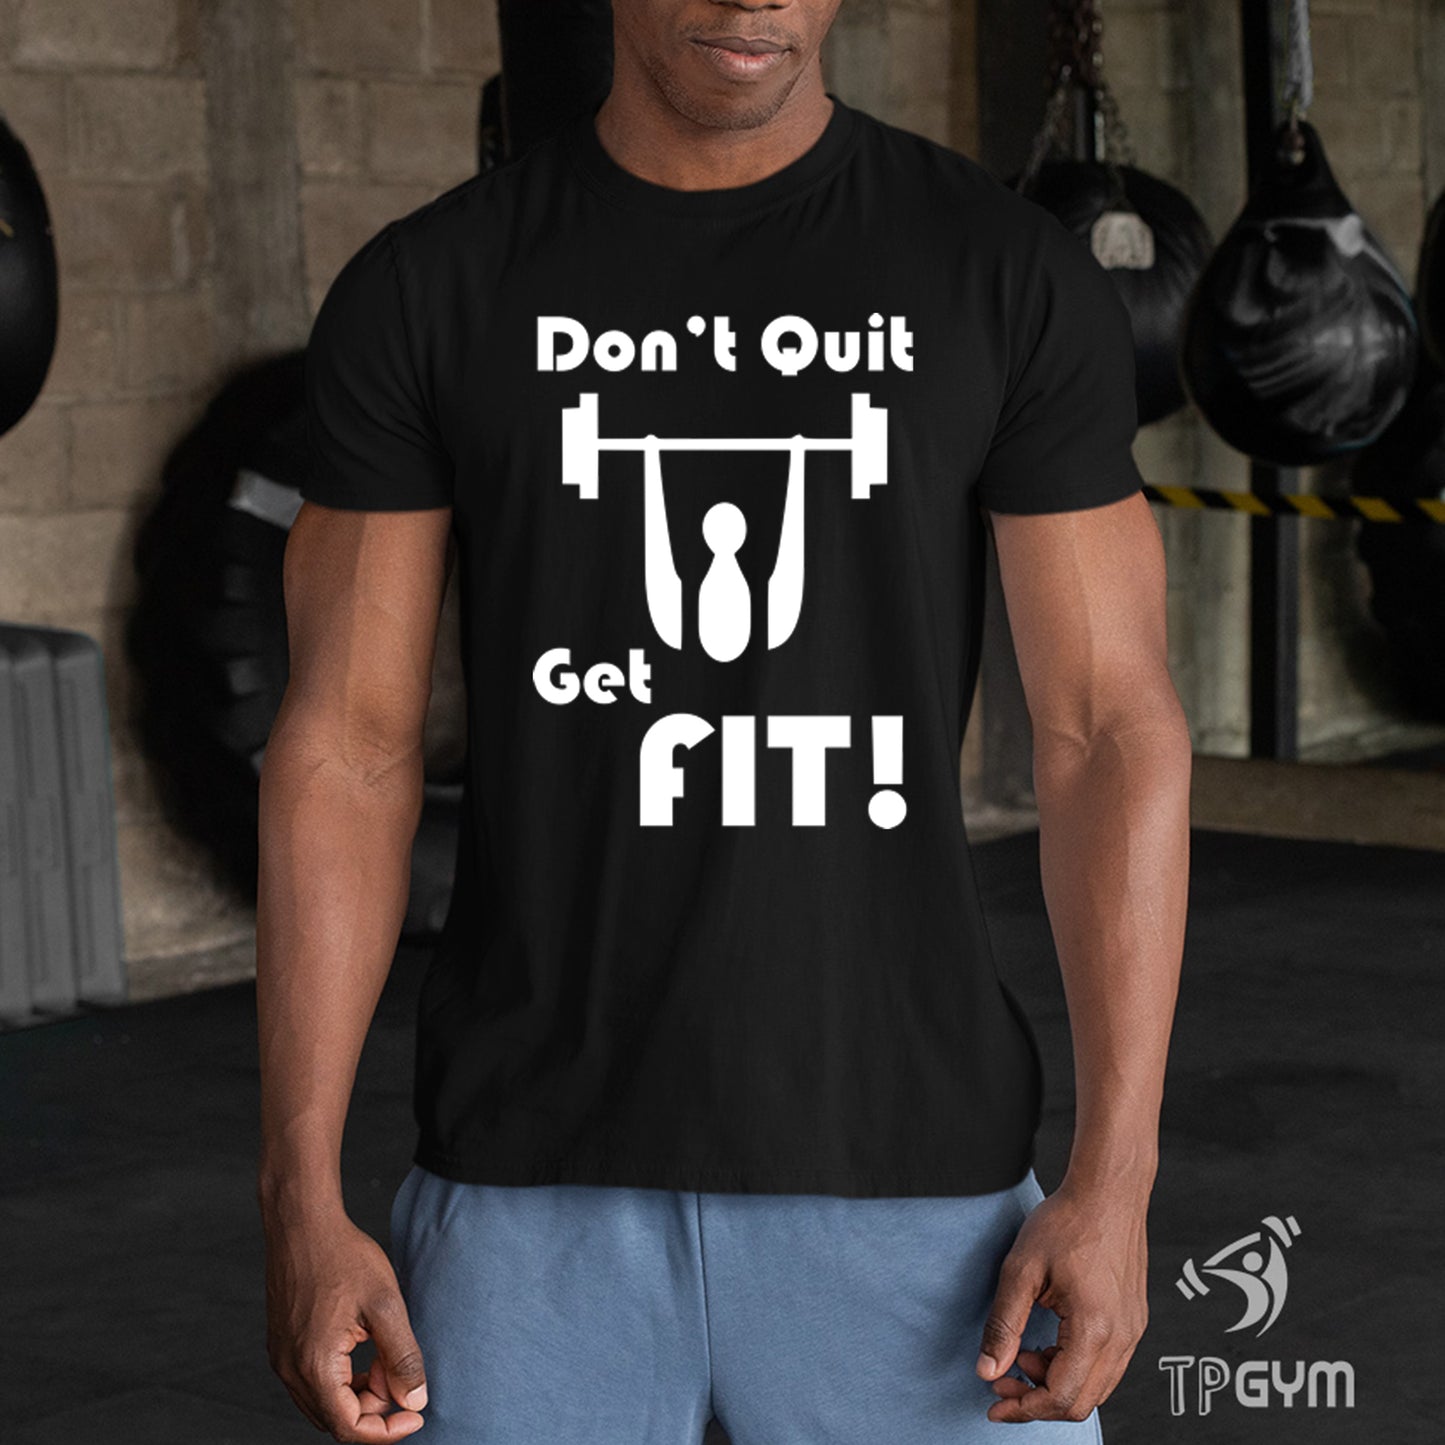 Gym Crossfit Fitness T Shirt Don't quit Get fit Barbells Push limits